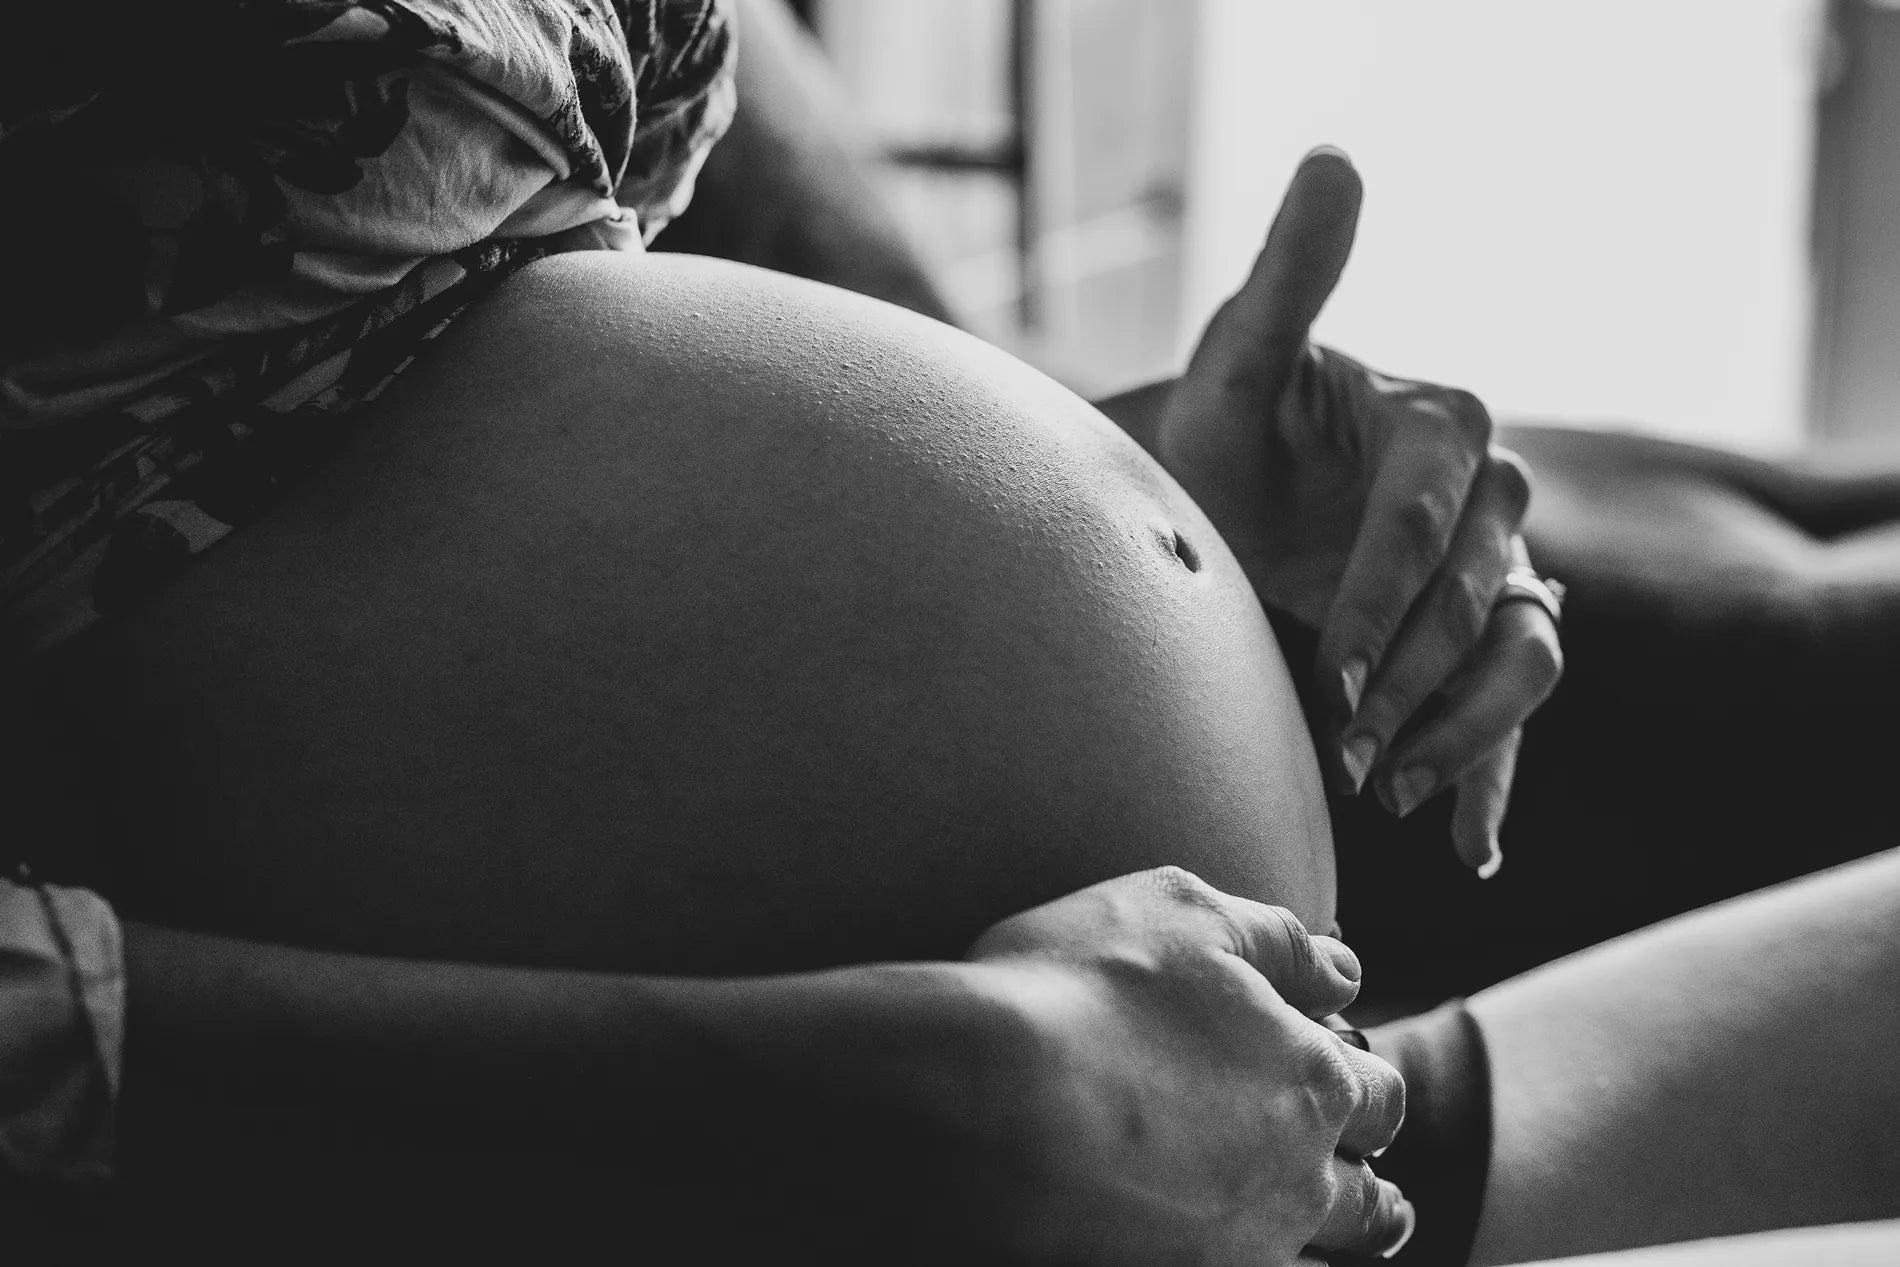 Self-advocacy during pregnancy, labour and delivery